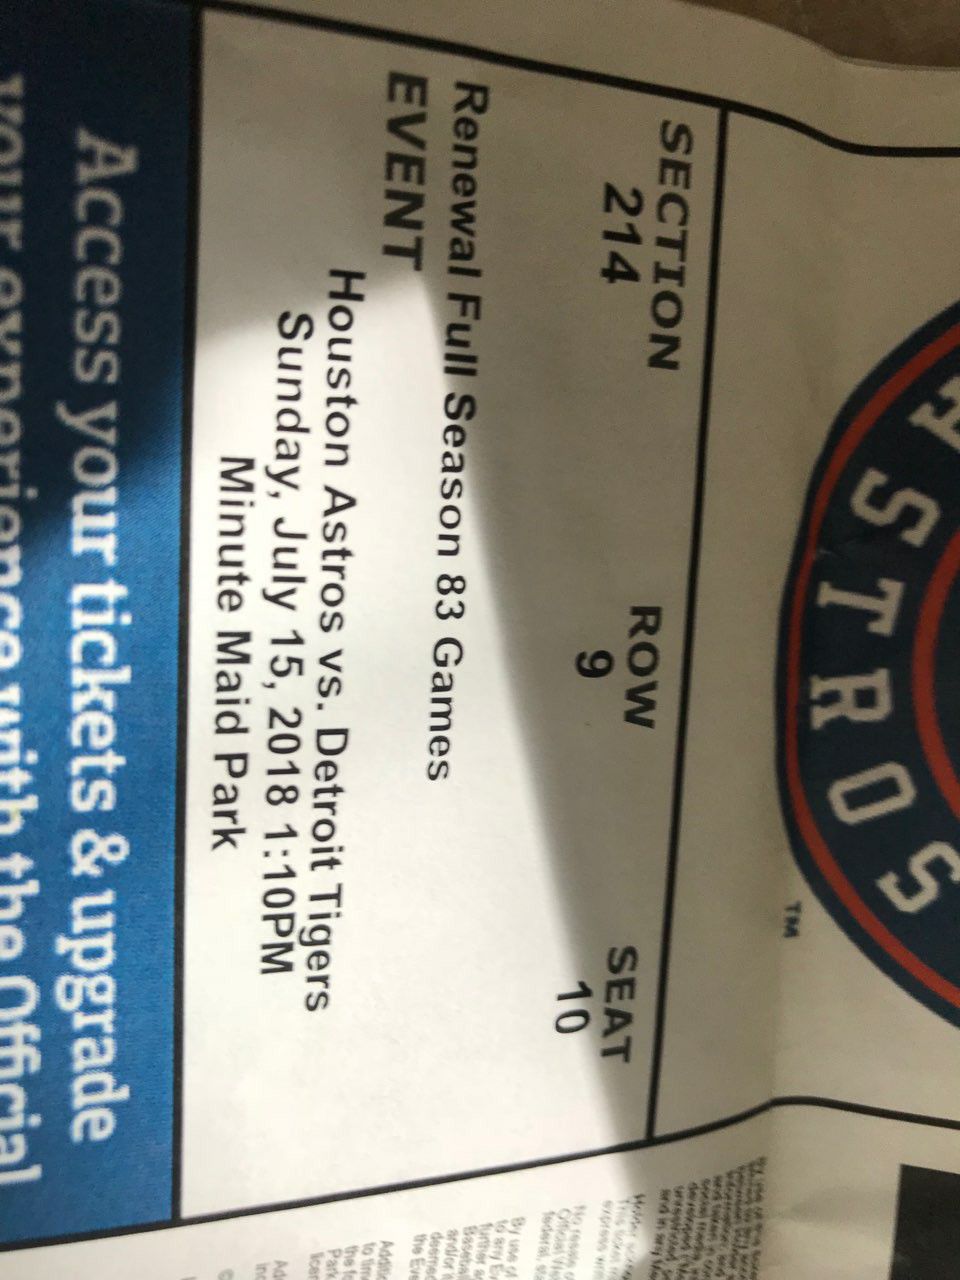 Houston Astros Vs San Diego Padres Replica Ring Giveaway Game Tickets for  Sale in Houston, TX - OfferUp